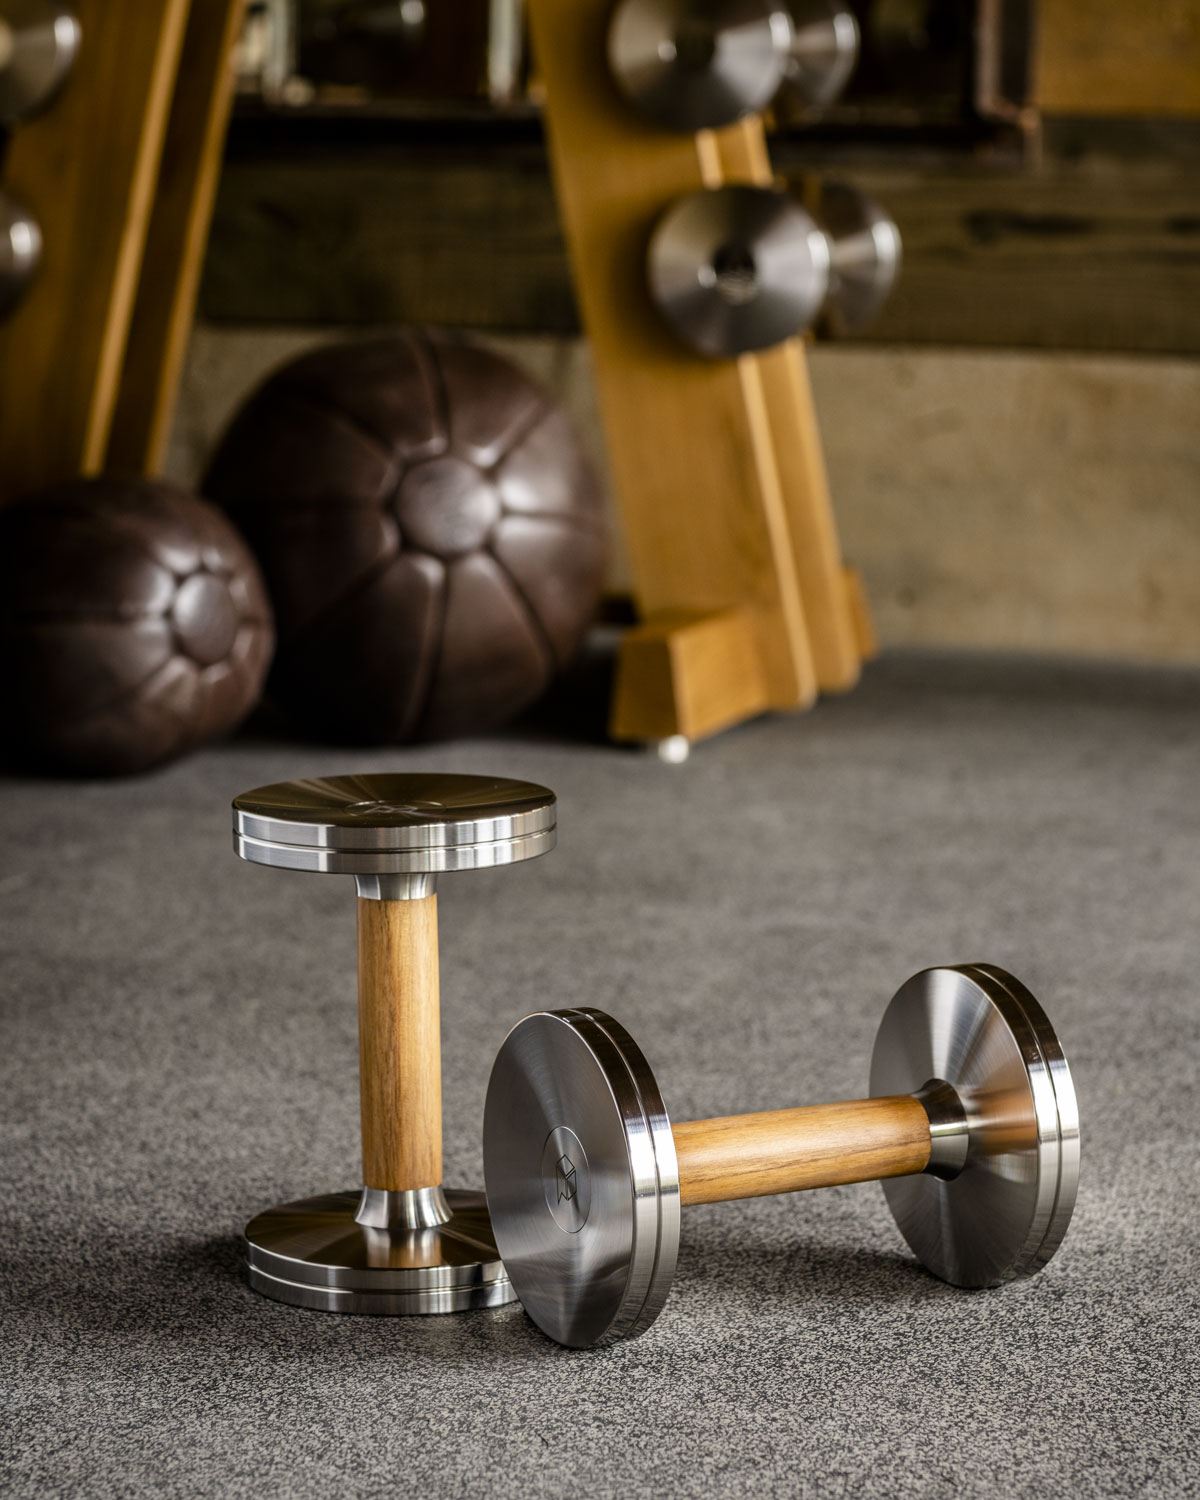 sustainable gym equipment, Bespoke, sustainable & luxurious: Paragon Studio gym equipment offers unlimited design choices